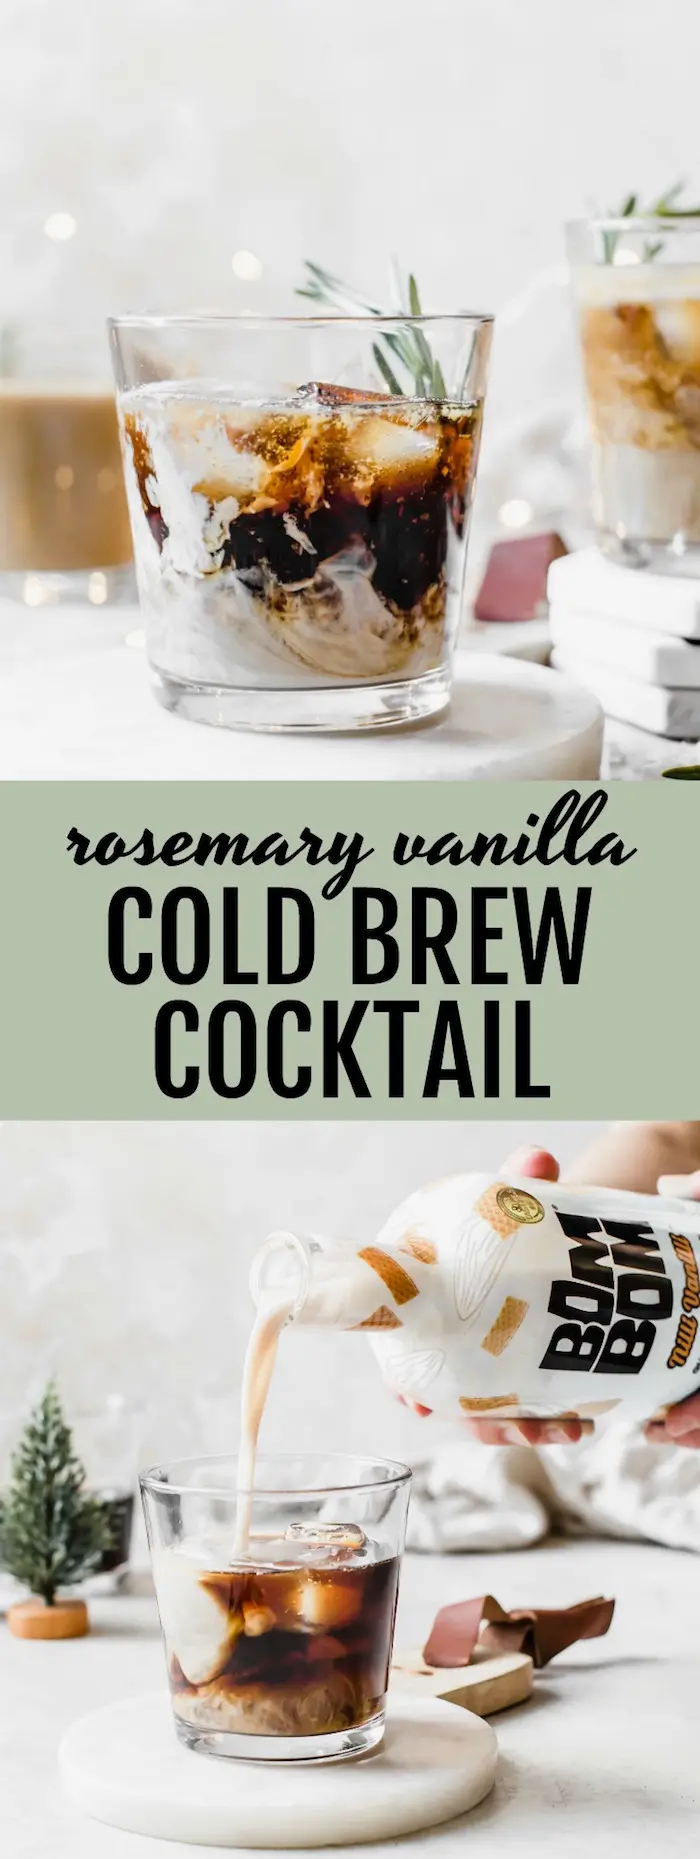 Rosemary Vanilla Cold Brew Cocktail - a rum-based cocktail made with cold brew, vanilla milk and rosemary syrup #vegan | thealmondeater.com 